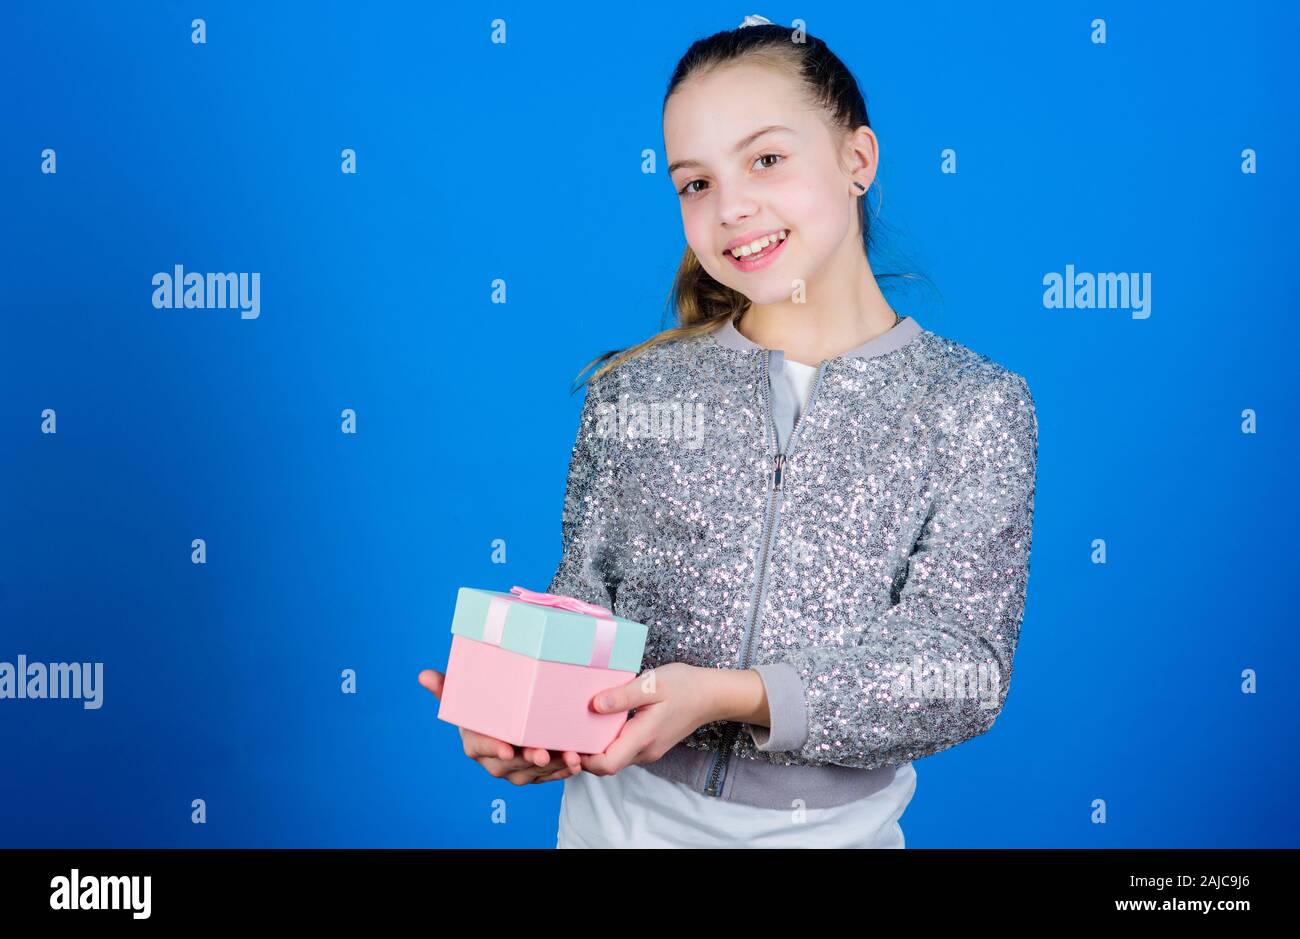 Girl with gift box blue background. Black friday. Shopping day. Cute adorable child carry gift box. Surprise gift box. Birthday wish list. World of happiness. Special happens every day. My precious. Stock Photo